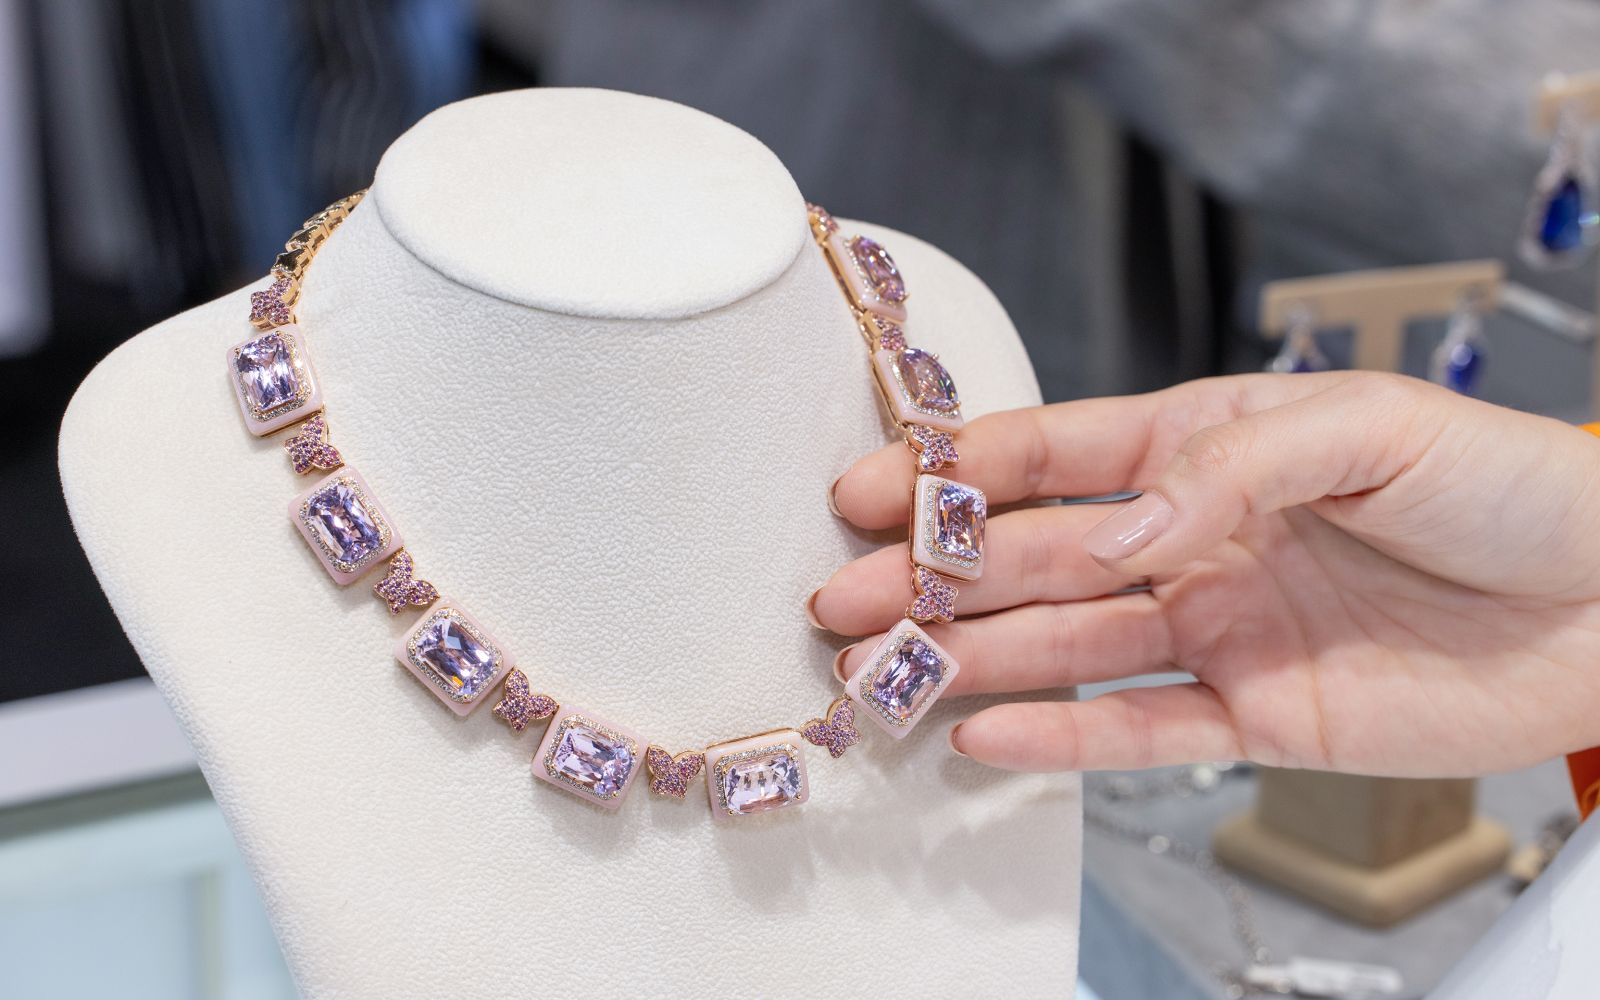 Sunita Nahata Cherry Blossom Kunzite necklace with nine octagon-shaped kunzites for a total of 84.34 carats, 13.96 carats of pink opal, amethyst, pink tourmaline and diamonds in 18k rose gold 